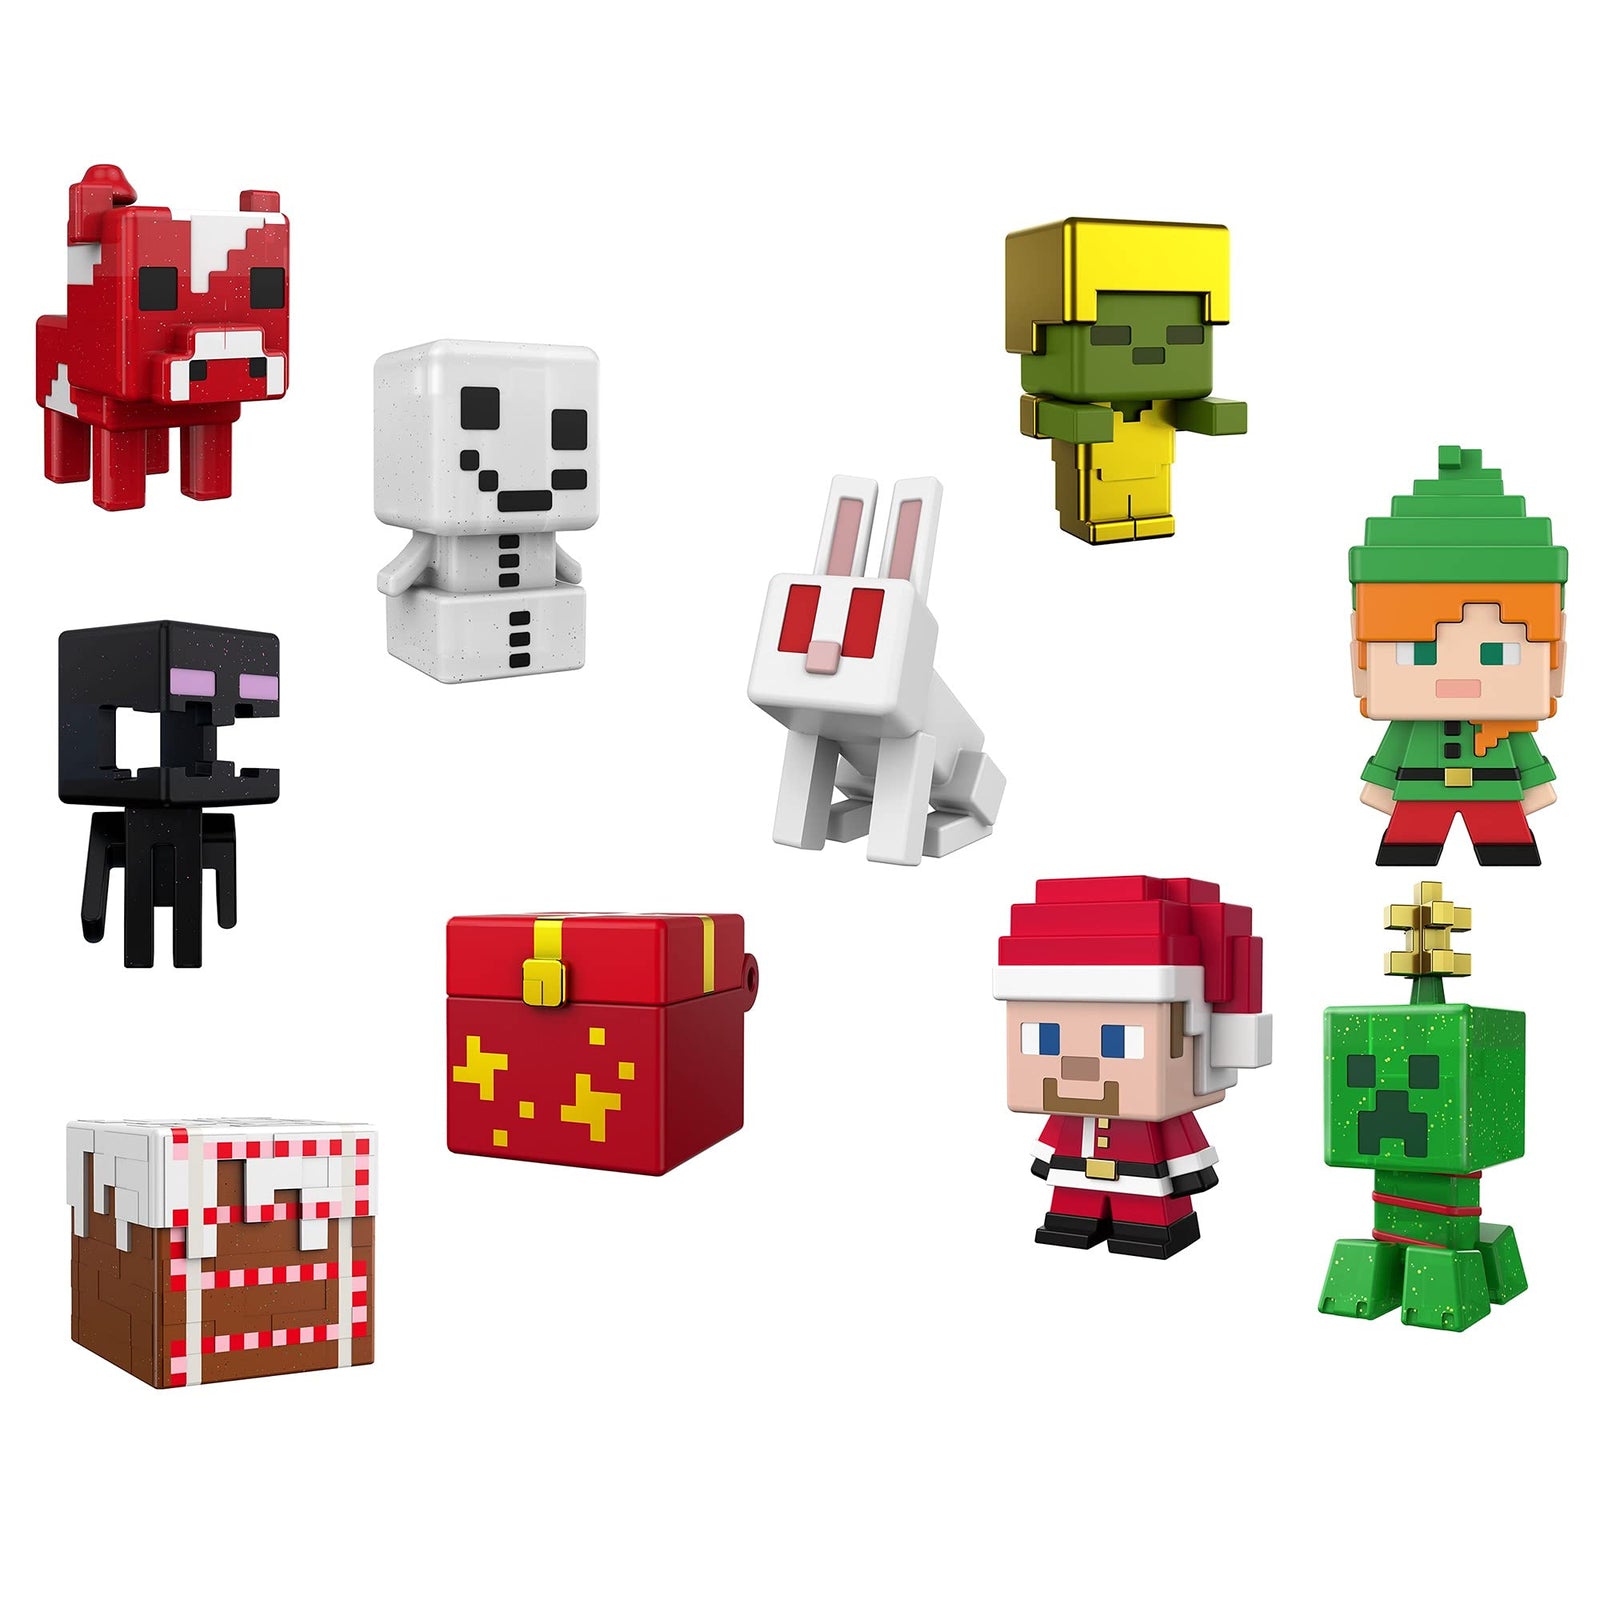 Minecraft Mini Figures 2021 Advent Calendar, One A Day Storytelling Fun with Minecraft Characters and Stickers, Holiday Activity Gift, for Kids Age 6 Years & Older